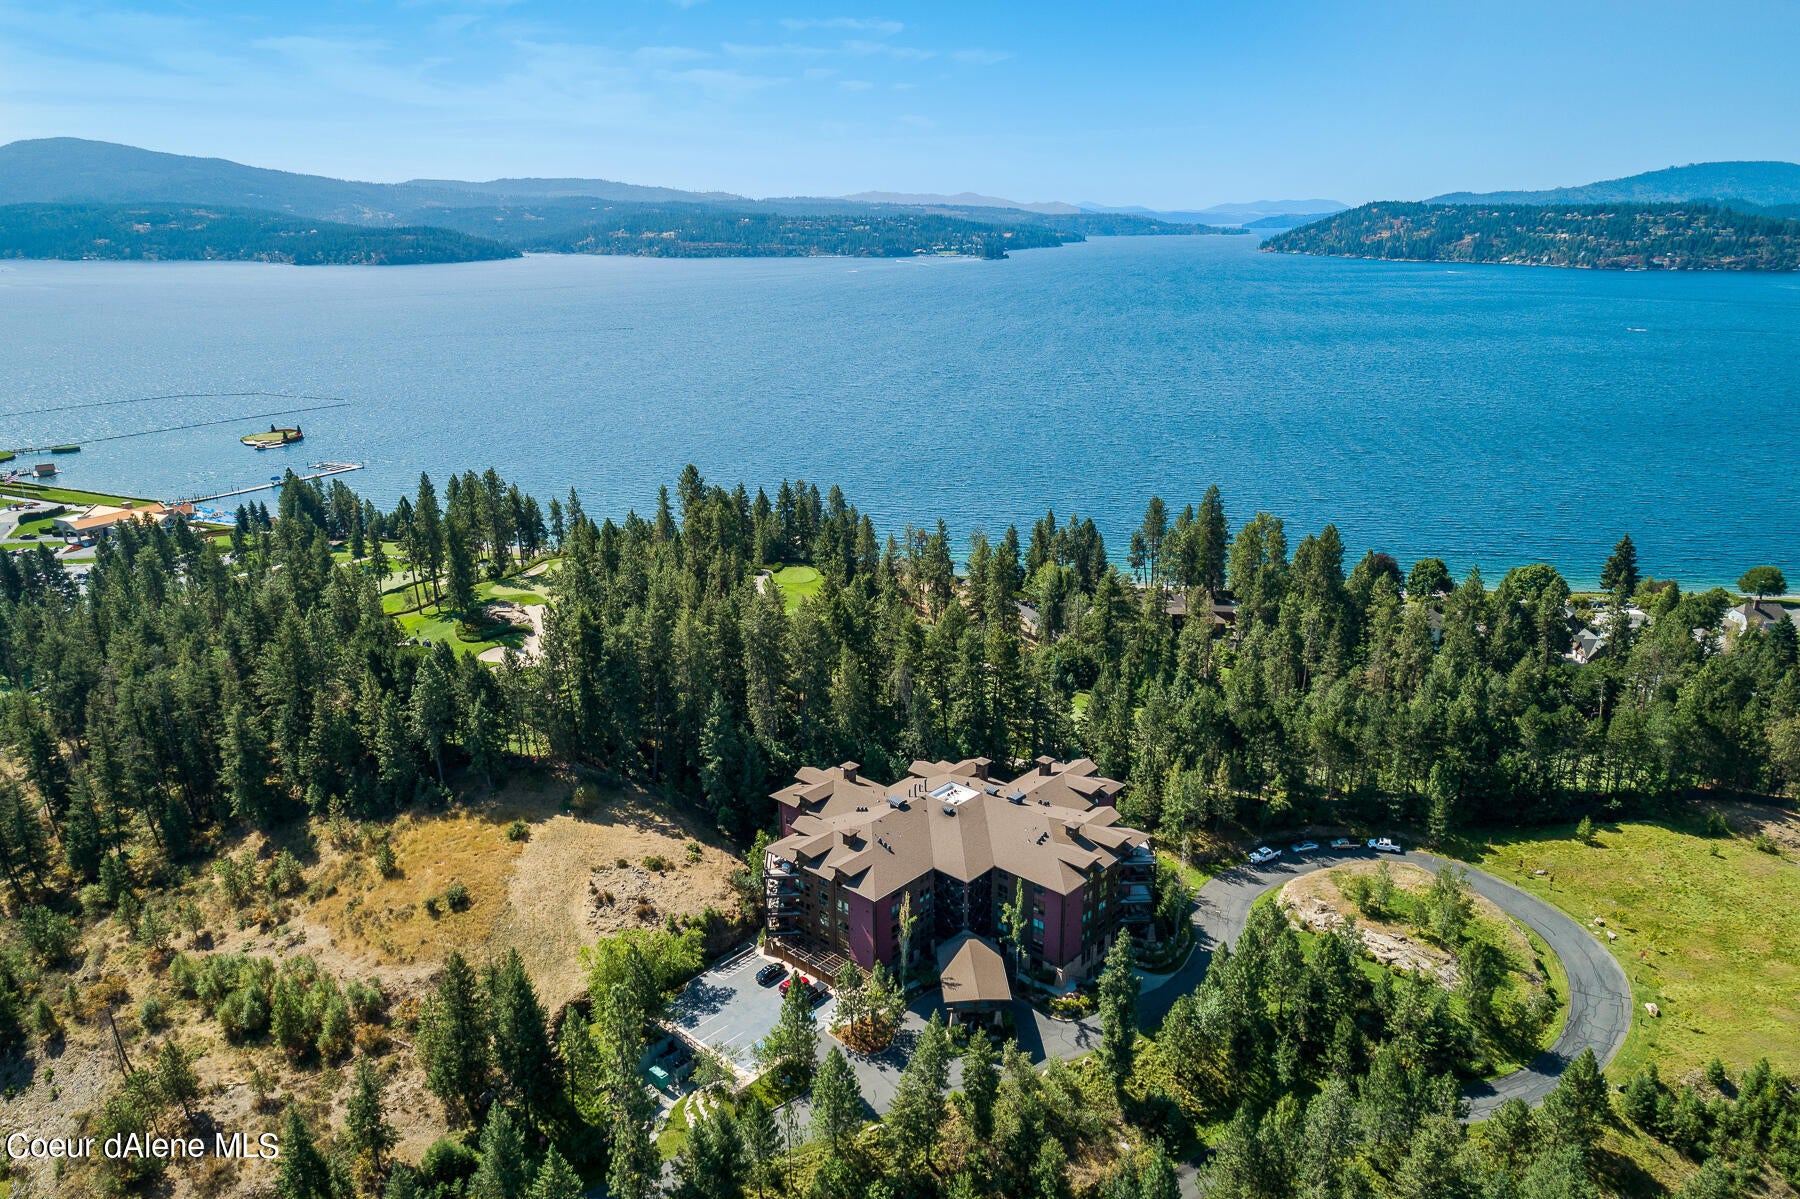 1700 E Tower Pointe Drive #102, Coeur d'Alene, Idaho, 83814, United States, 3 Bedrooms Bedrooms, ,2 BathroomsBathrooms,Residential,For Sale,1700 E Tower Pointe Drive #102,1478989